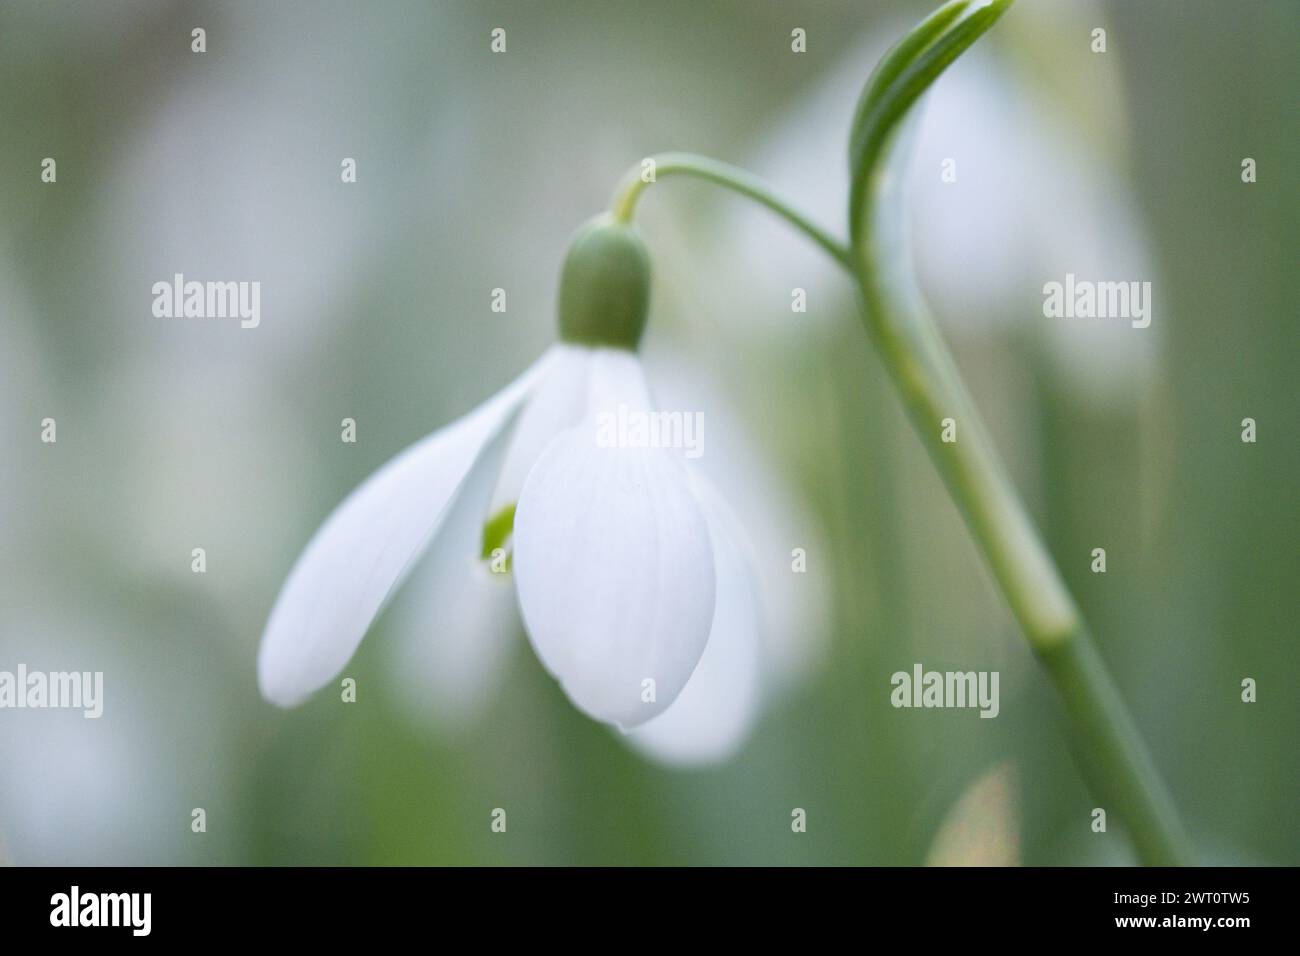 Delicate white snowdrop flowers in early spring garden. Stock Photo